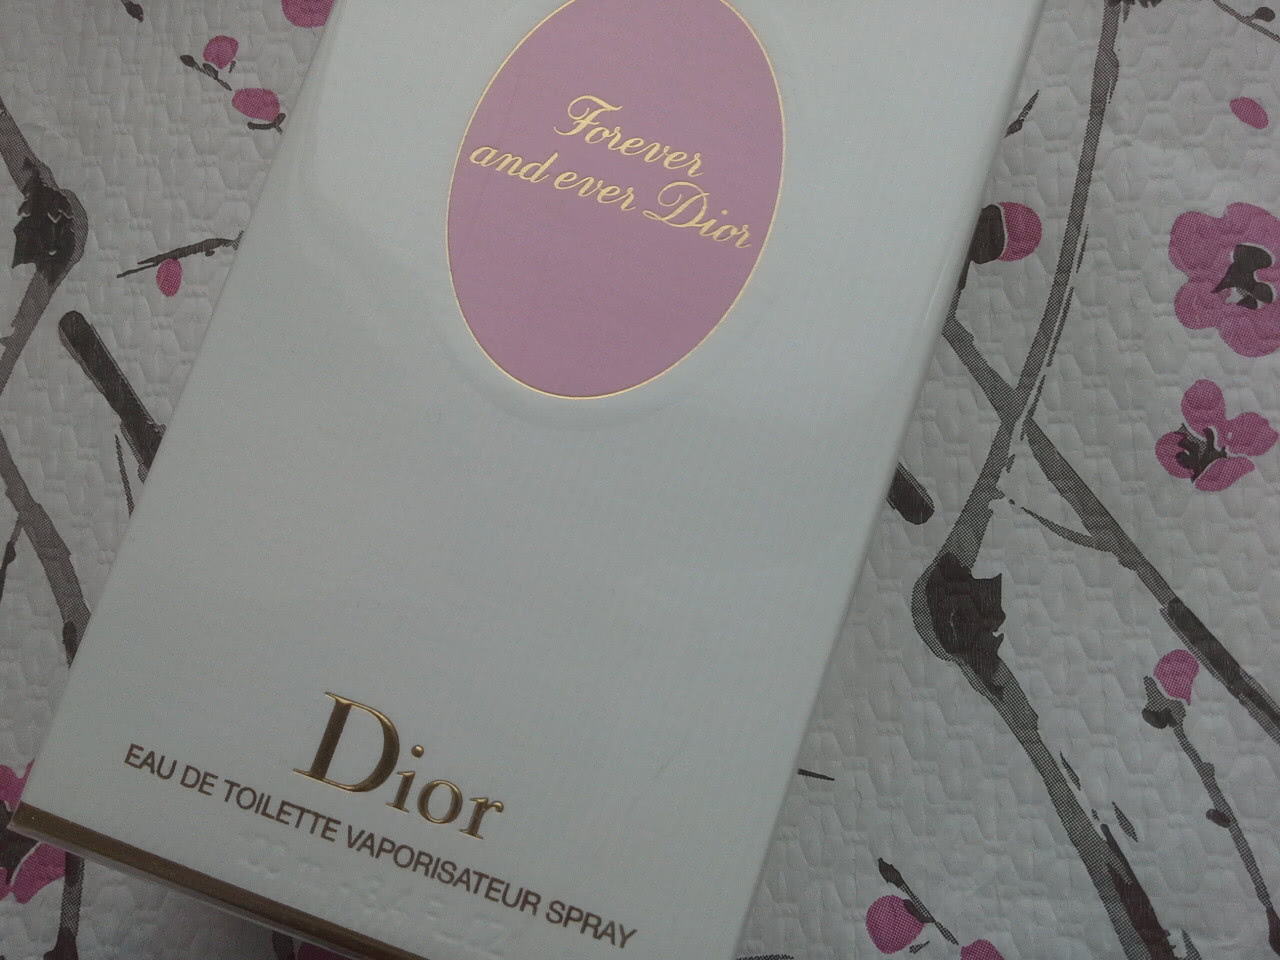 Dior Forever and ever Dior edt 100ml